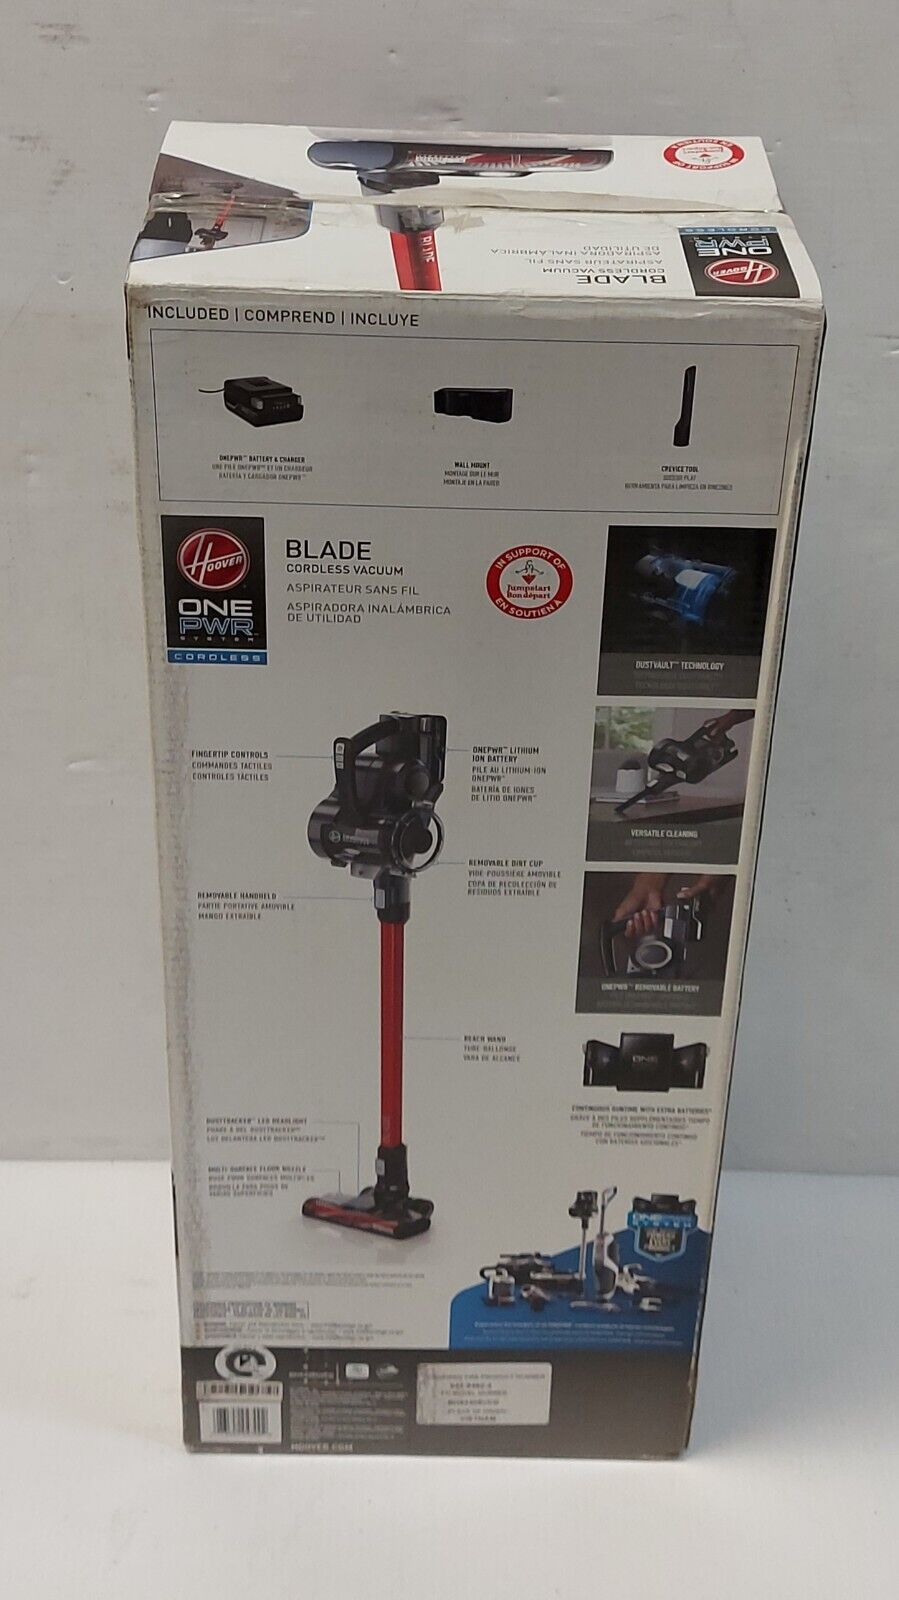 (N81572-1) Hoover One Power BH53305 Upright Vac